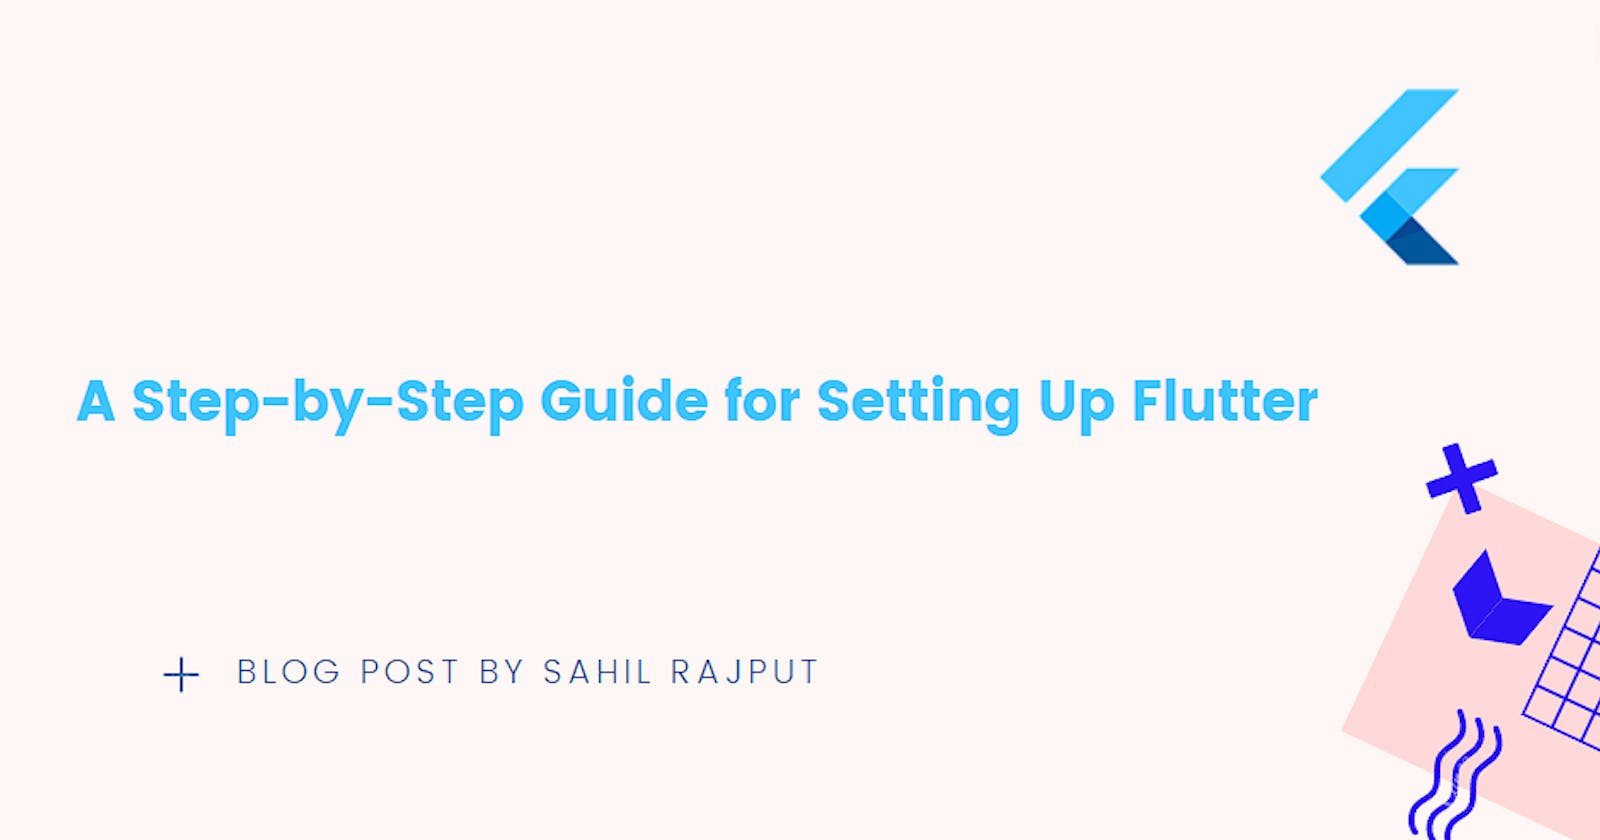 A Step-by-Step Guide for Setting Up Flutter